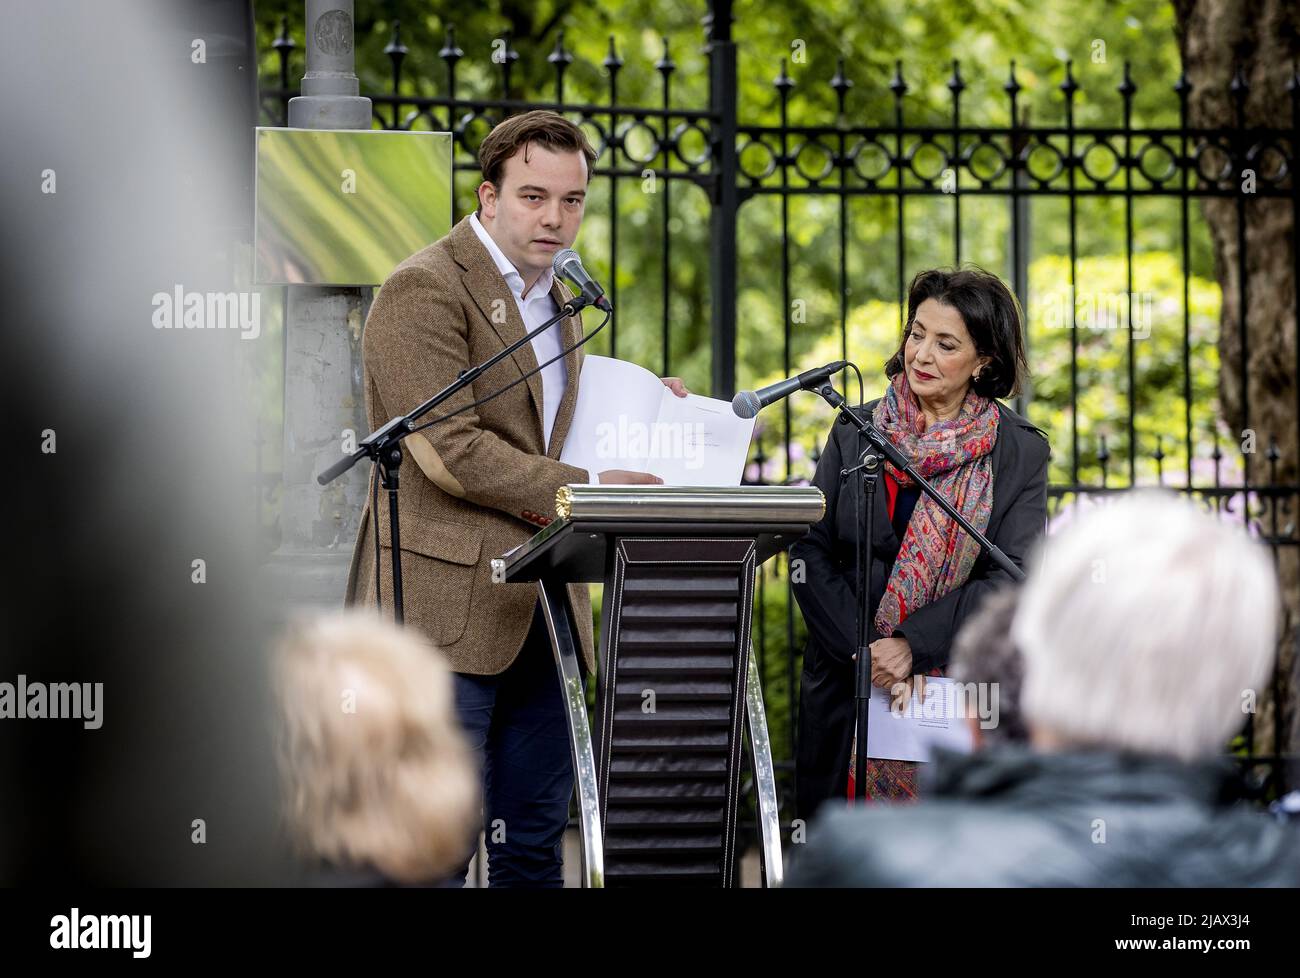 2022-06-01 16:24:32 AMSTERDAM - Coen van Dijk (L) and Khadija Arib during the Sobibor commemoration at the entrance of the Vondelpark on the spot where the Forbidden for Jews sign hung during WWII and where there is now a mirror monument that wants to confront citizens with their own responsibility not to leave. look at injustice. ANP KOEN VAN WEEL netherlands out - belgium out Stock Photo